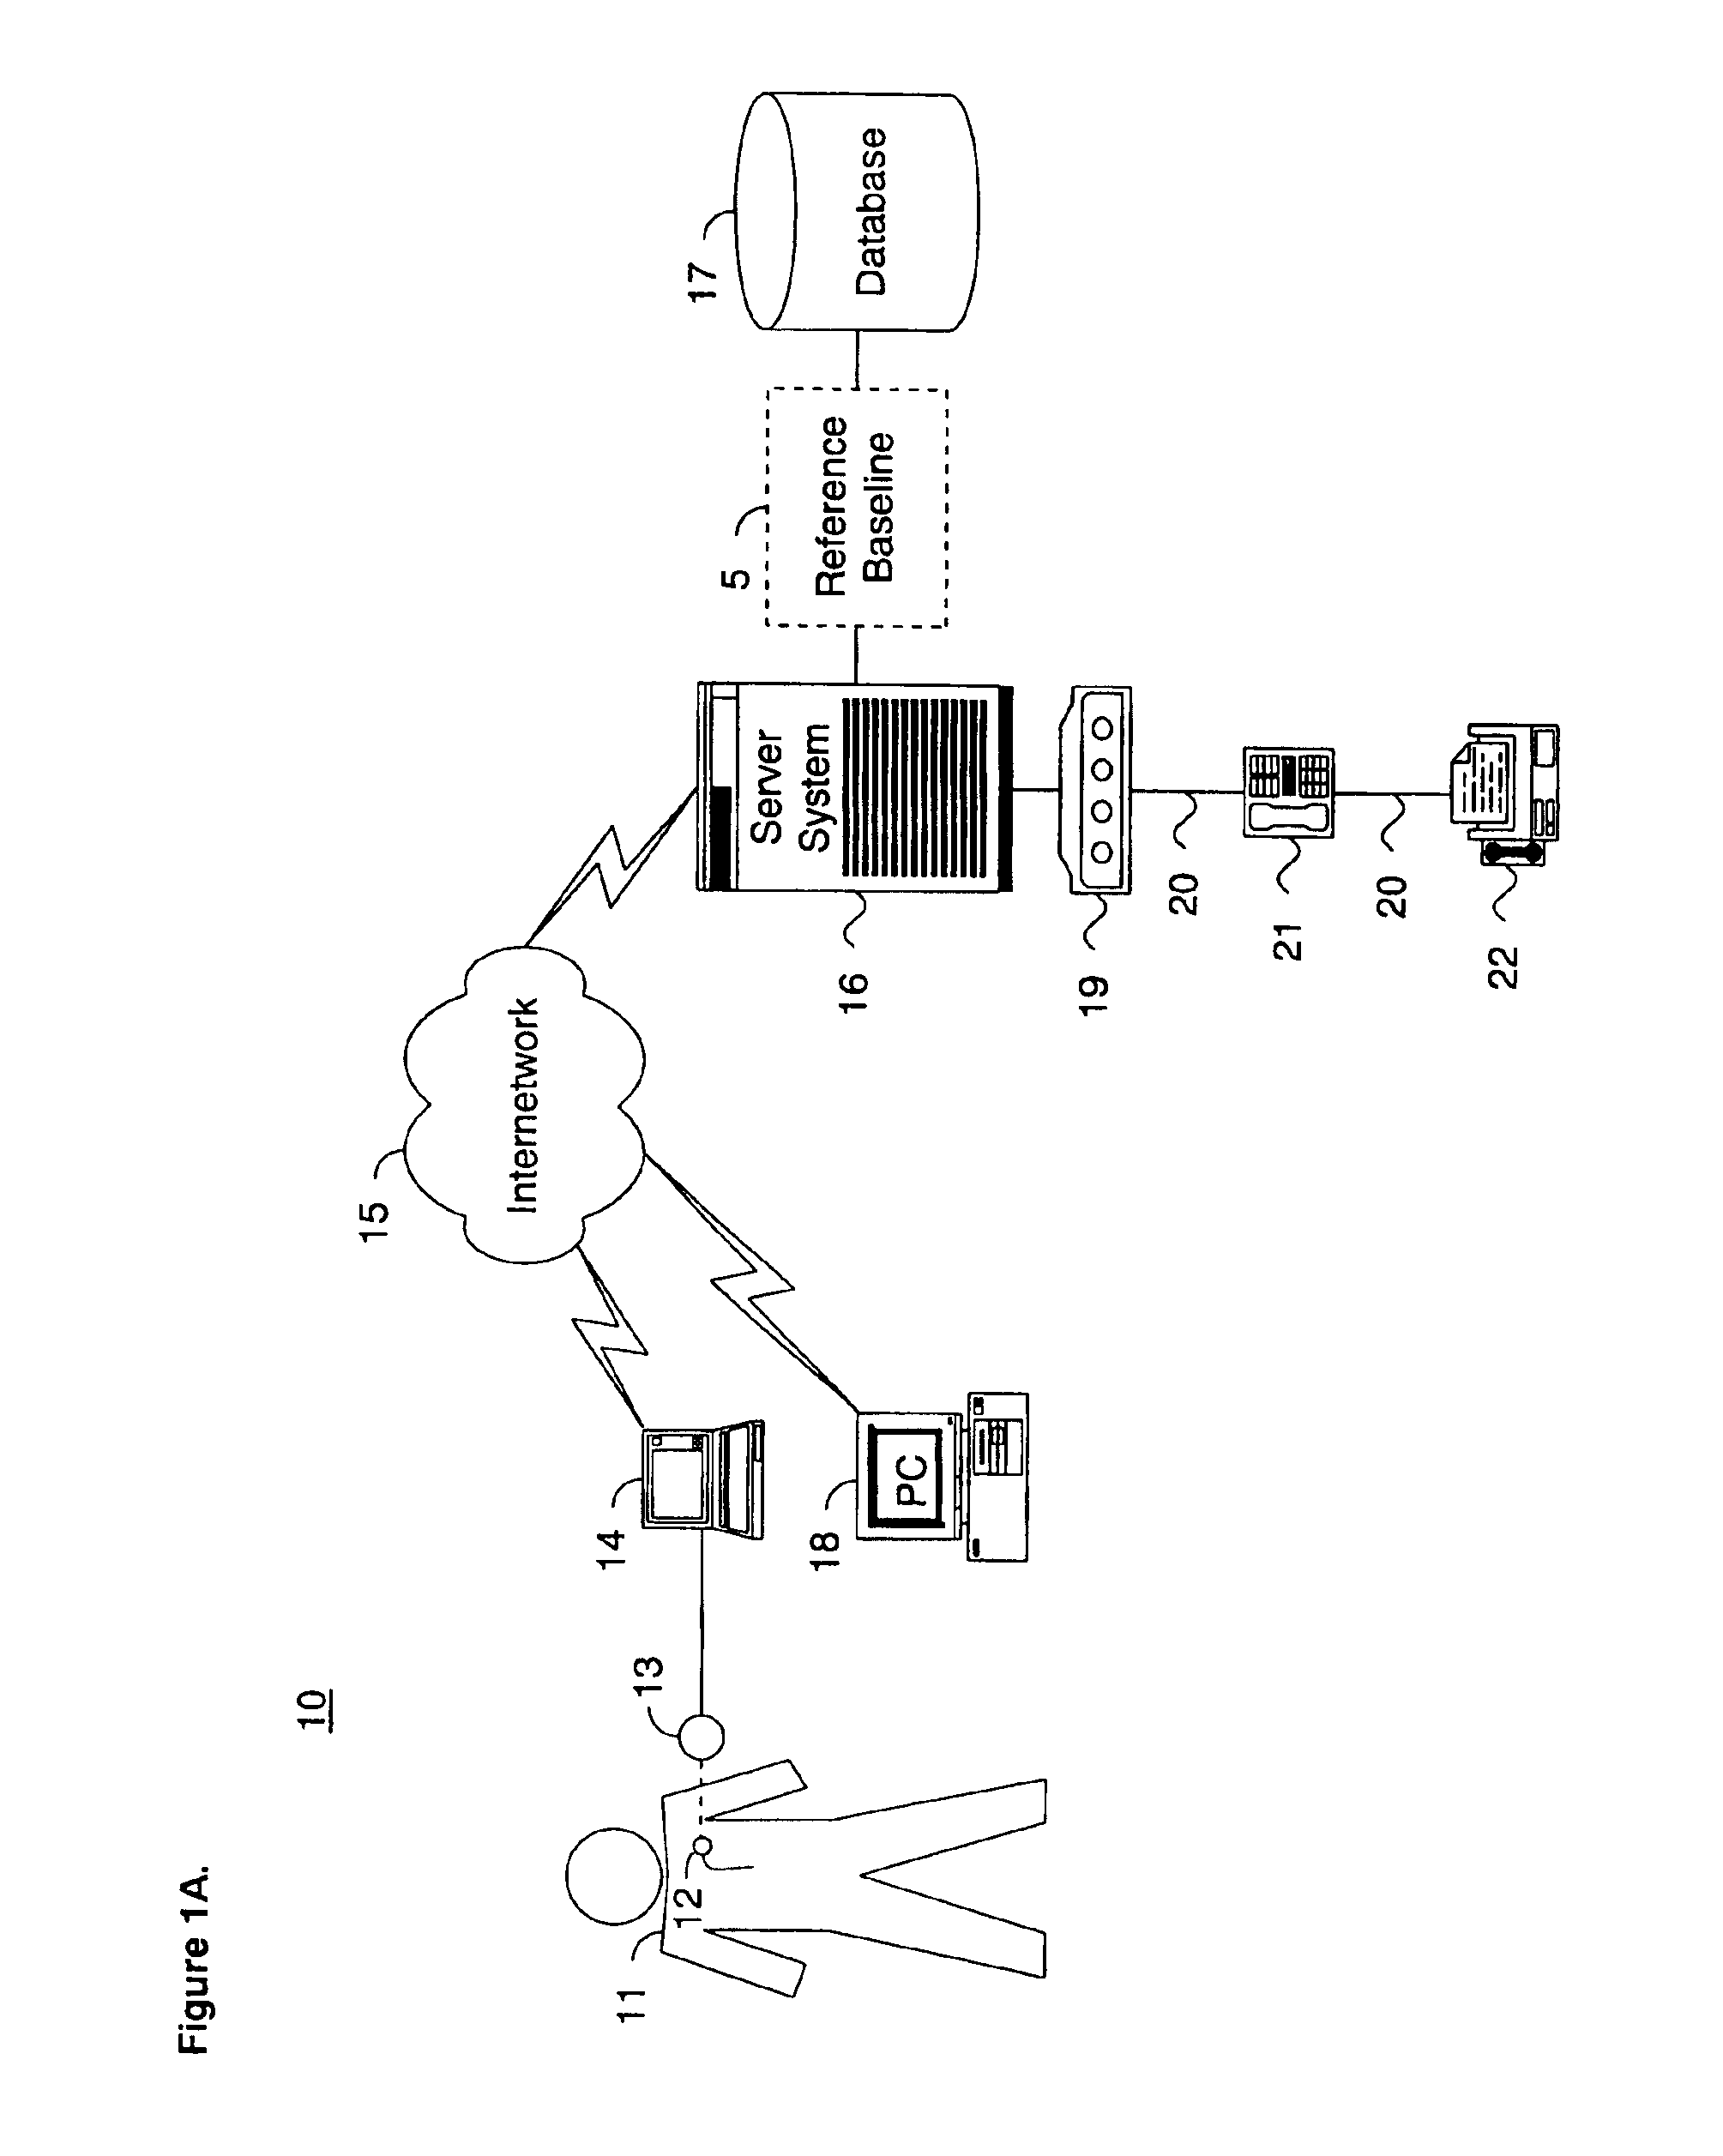 System and method for determining a reference baseline of patient information for automated remote patient care